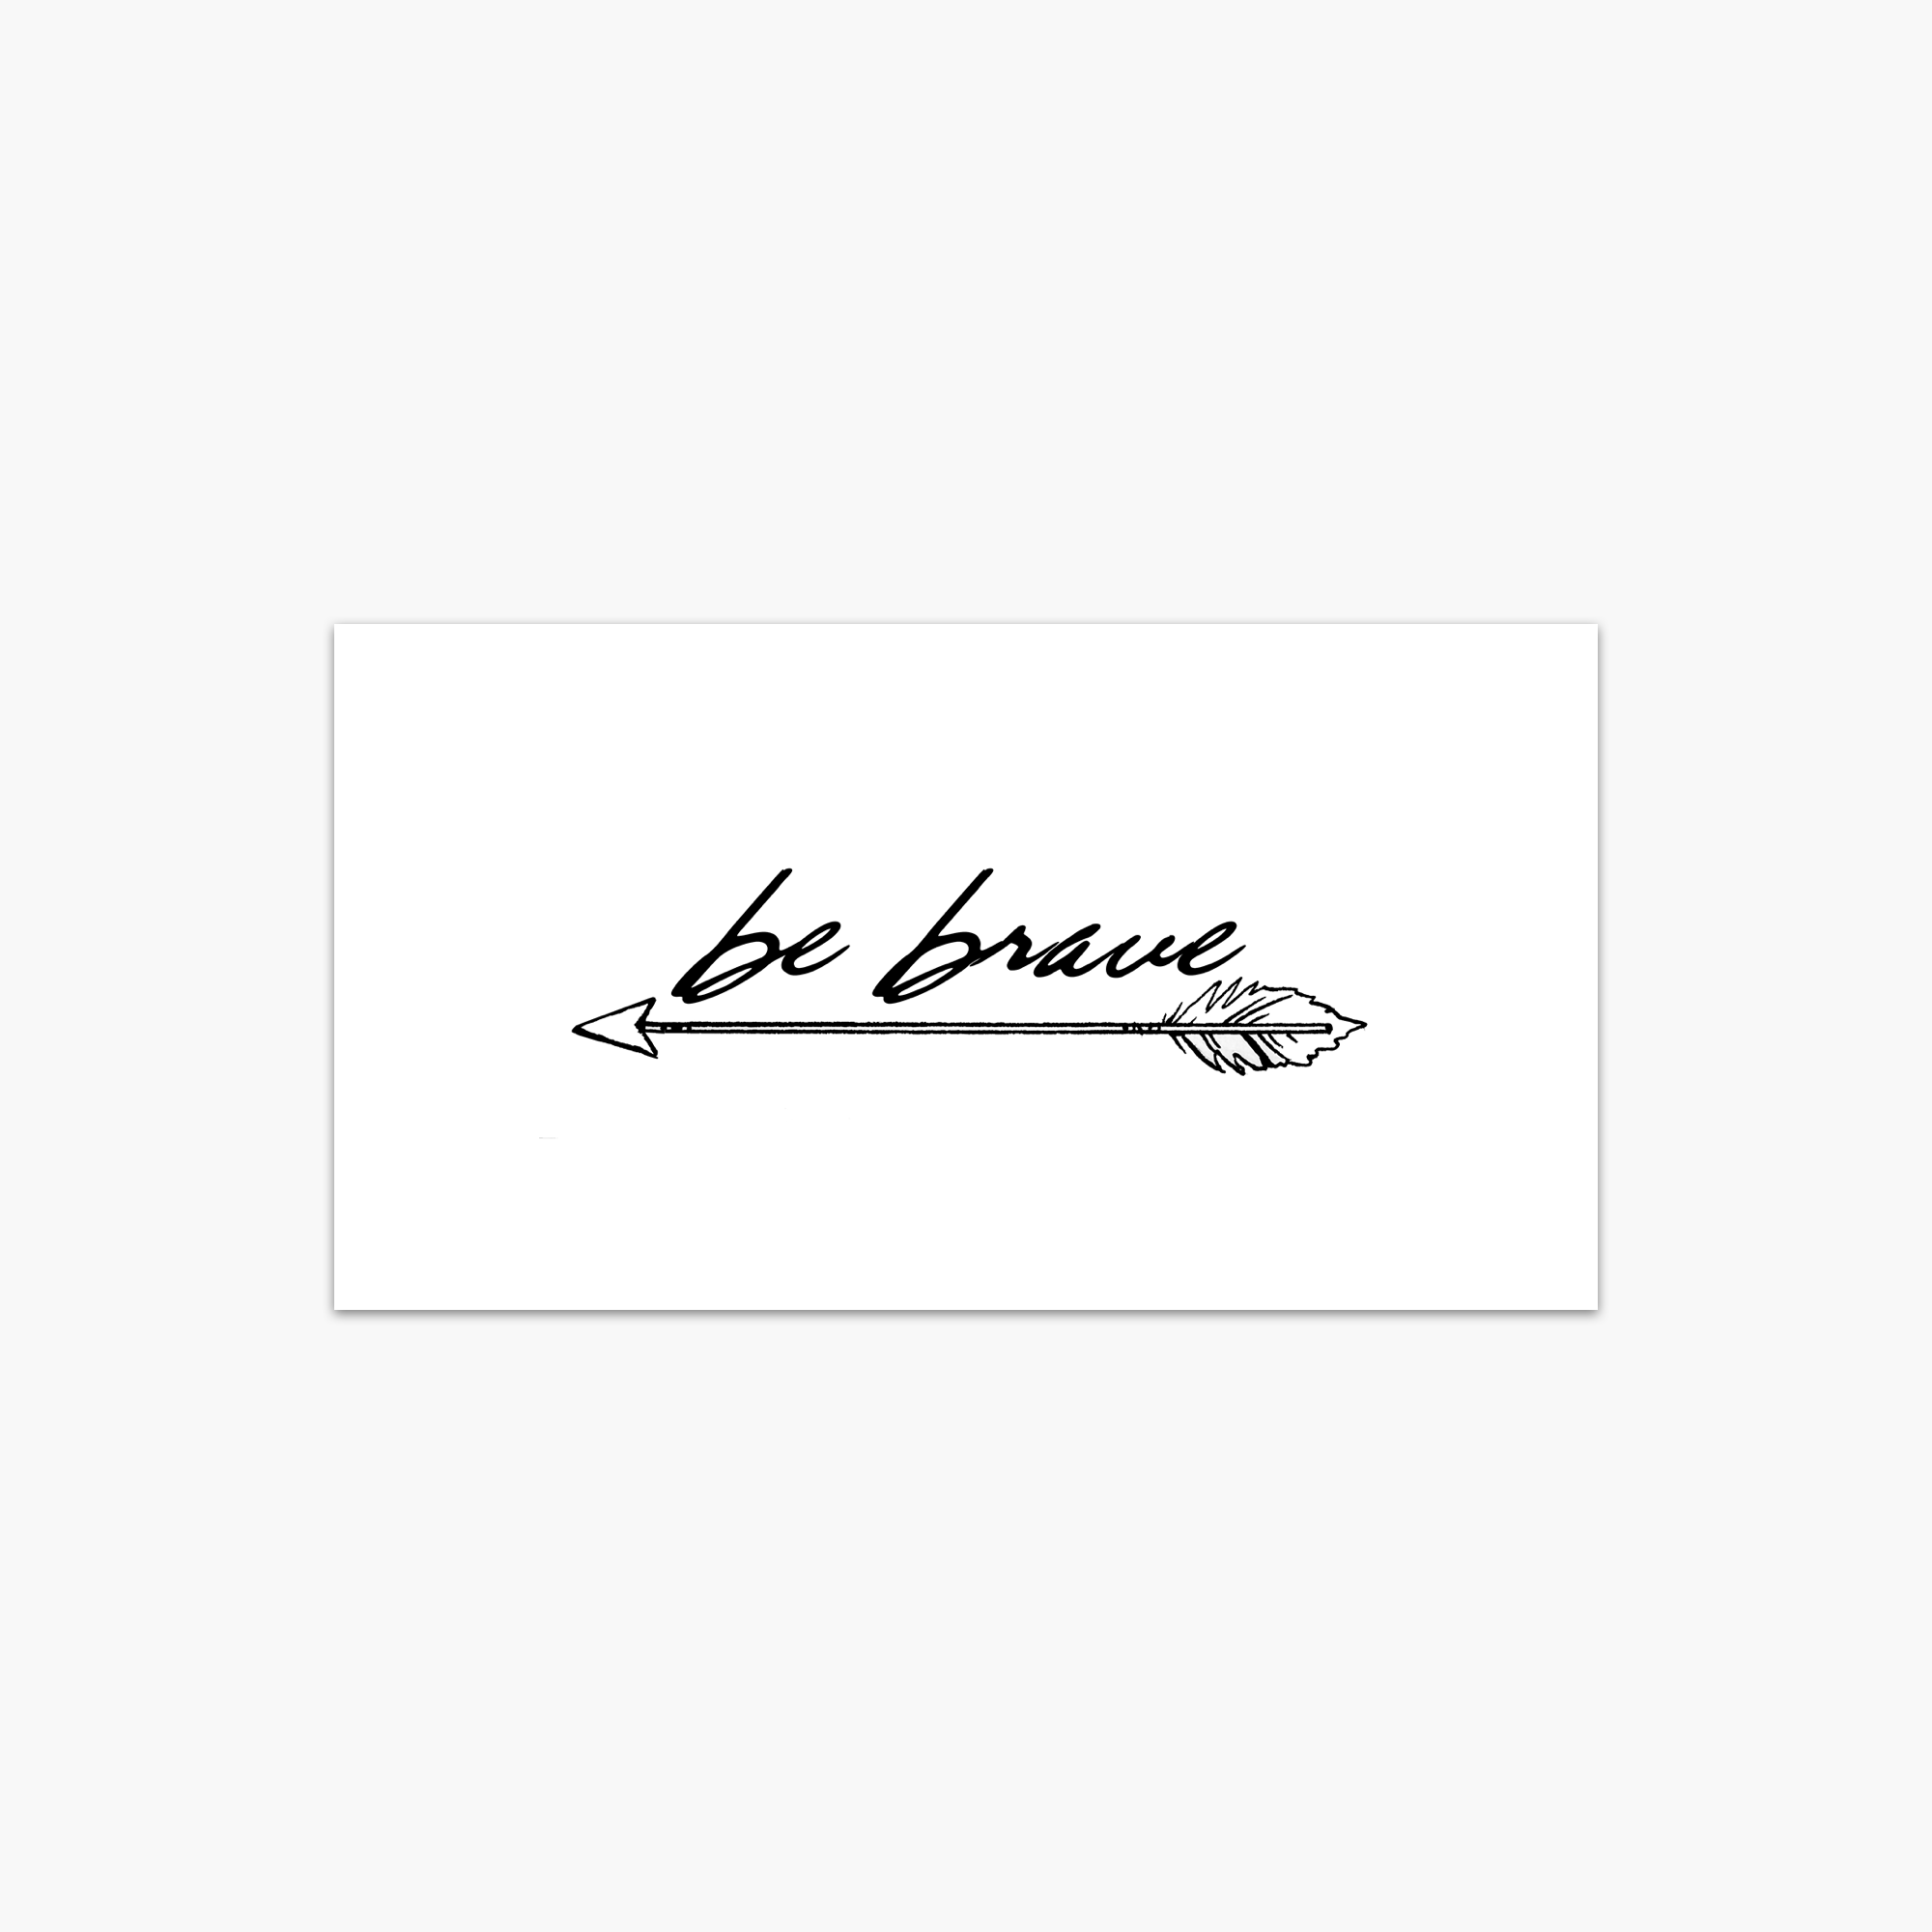 Studio Arcanum Tattoo - Be strong, be brave | Facebook